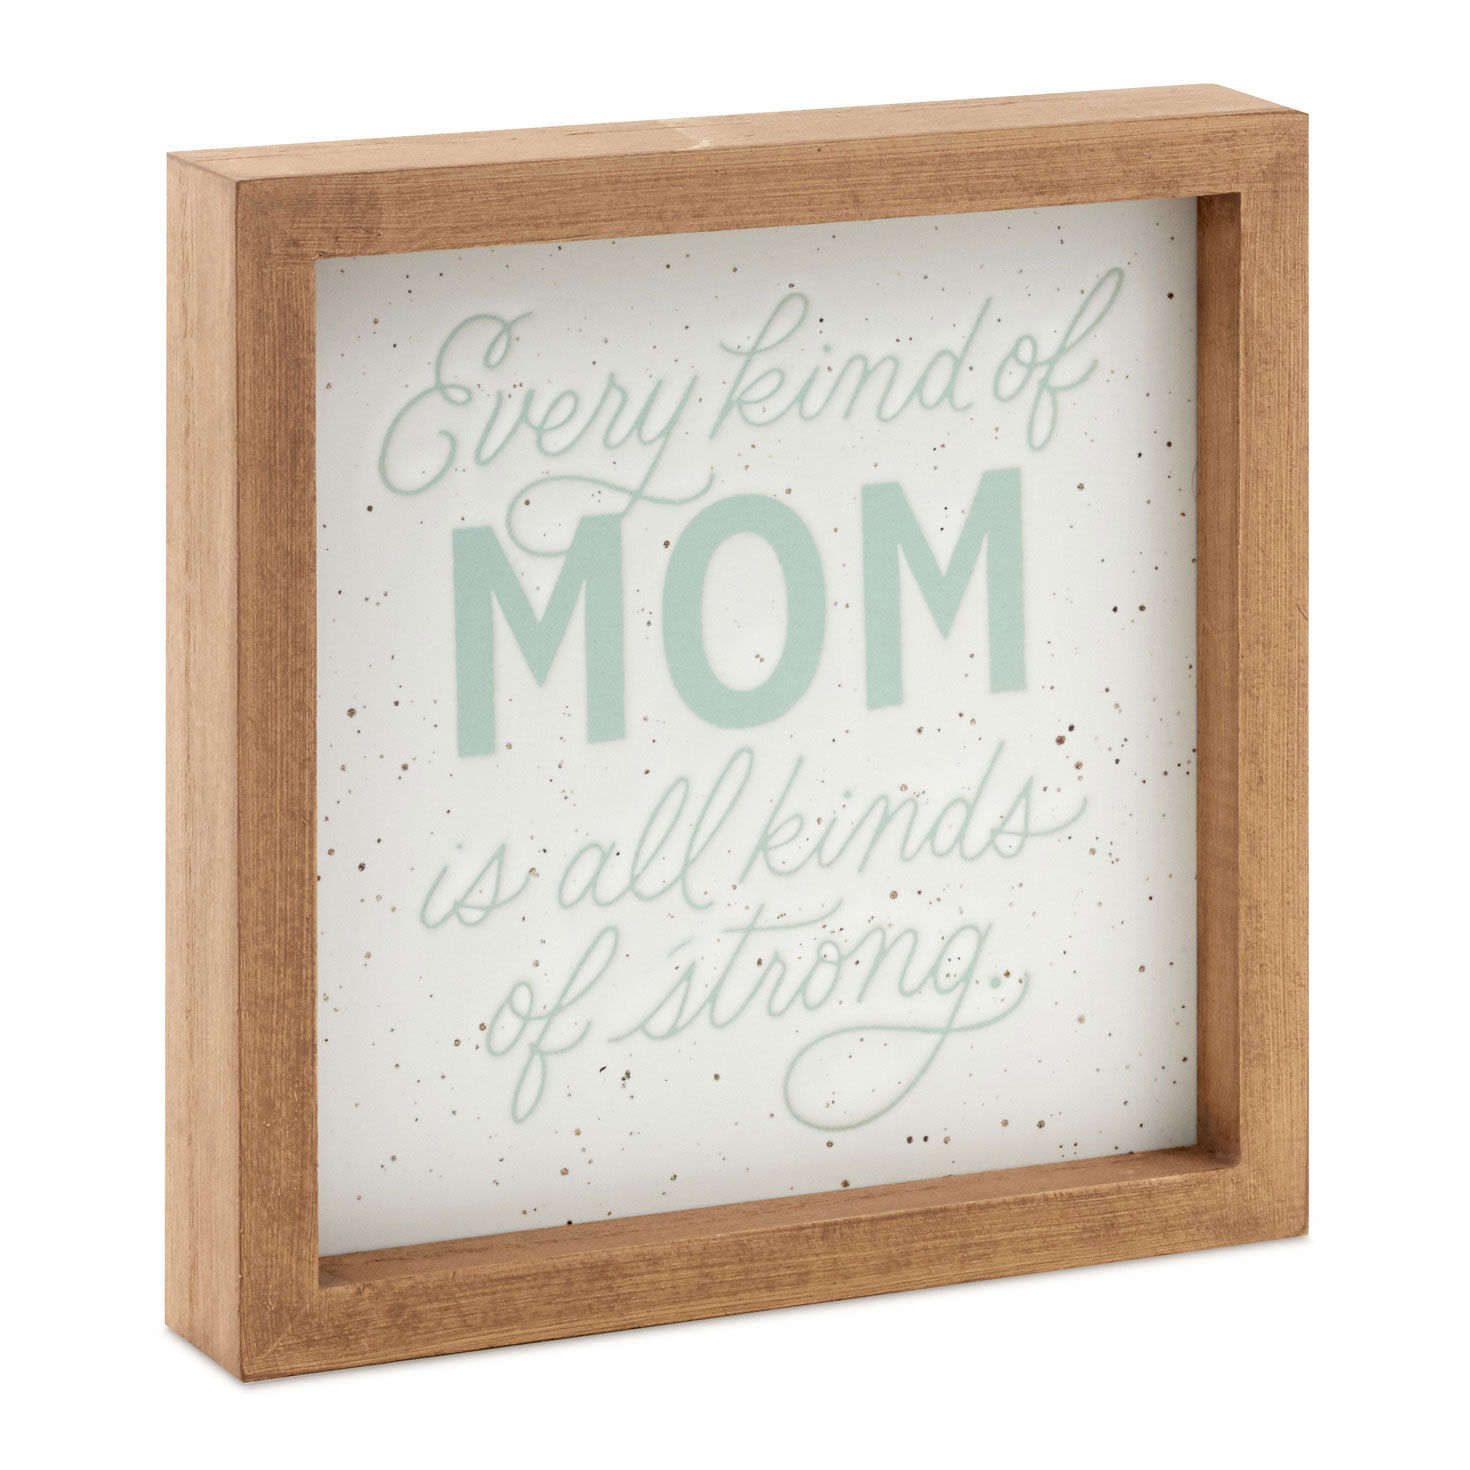 Every Kind of Mom Framed Quote Sign, 7x7 for only USD 19.99 | Hallmark